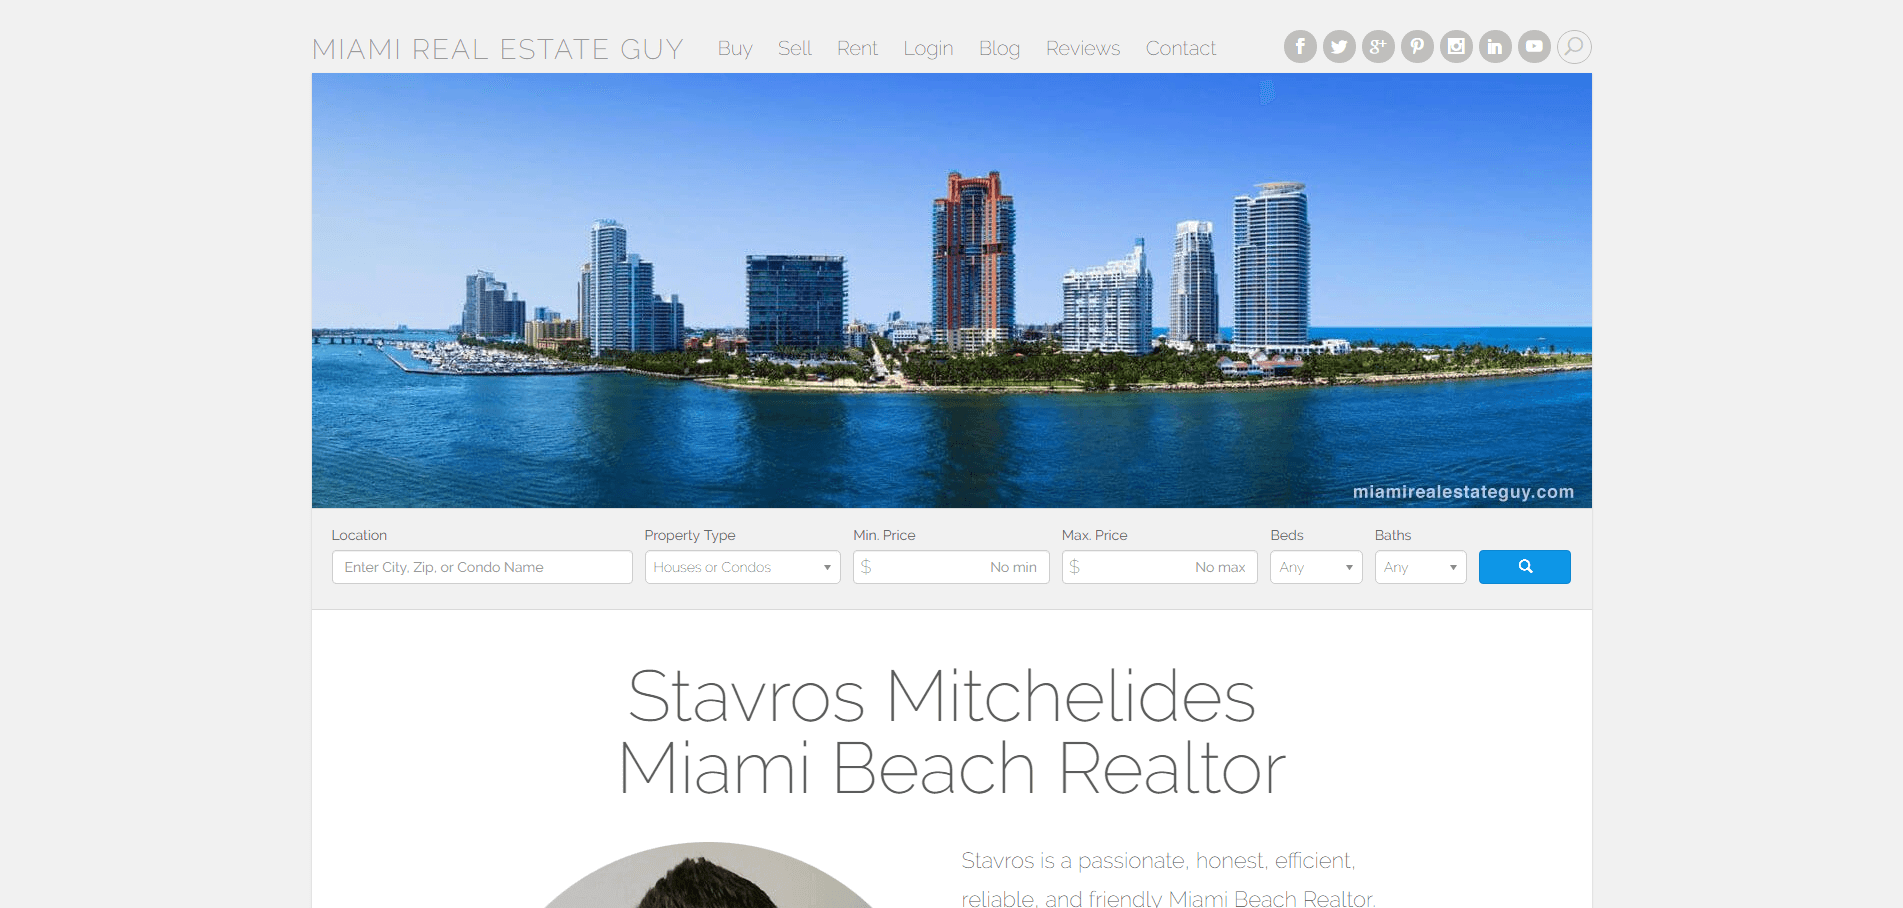  Whoa!  Looking for the best real estate websites? Here are 101 of them.  We ranked each site 1-101 and reviewed them all.  Here's miamirealestateguy.com.  Guess who made #1! 